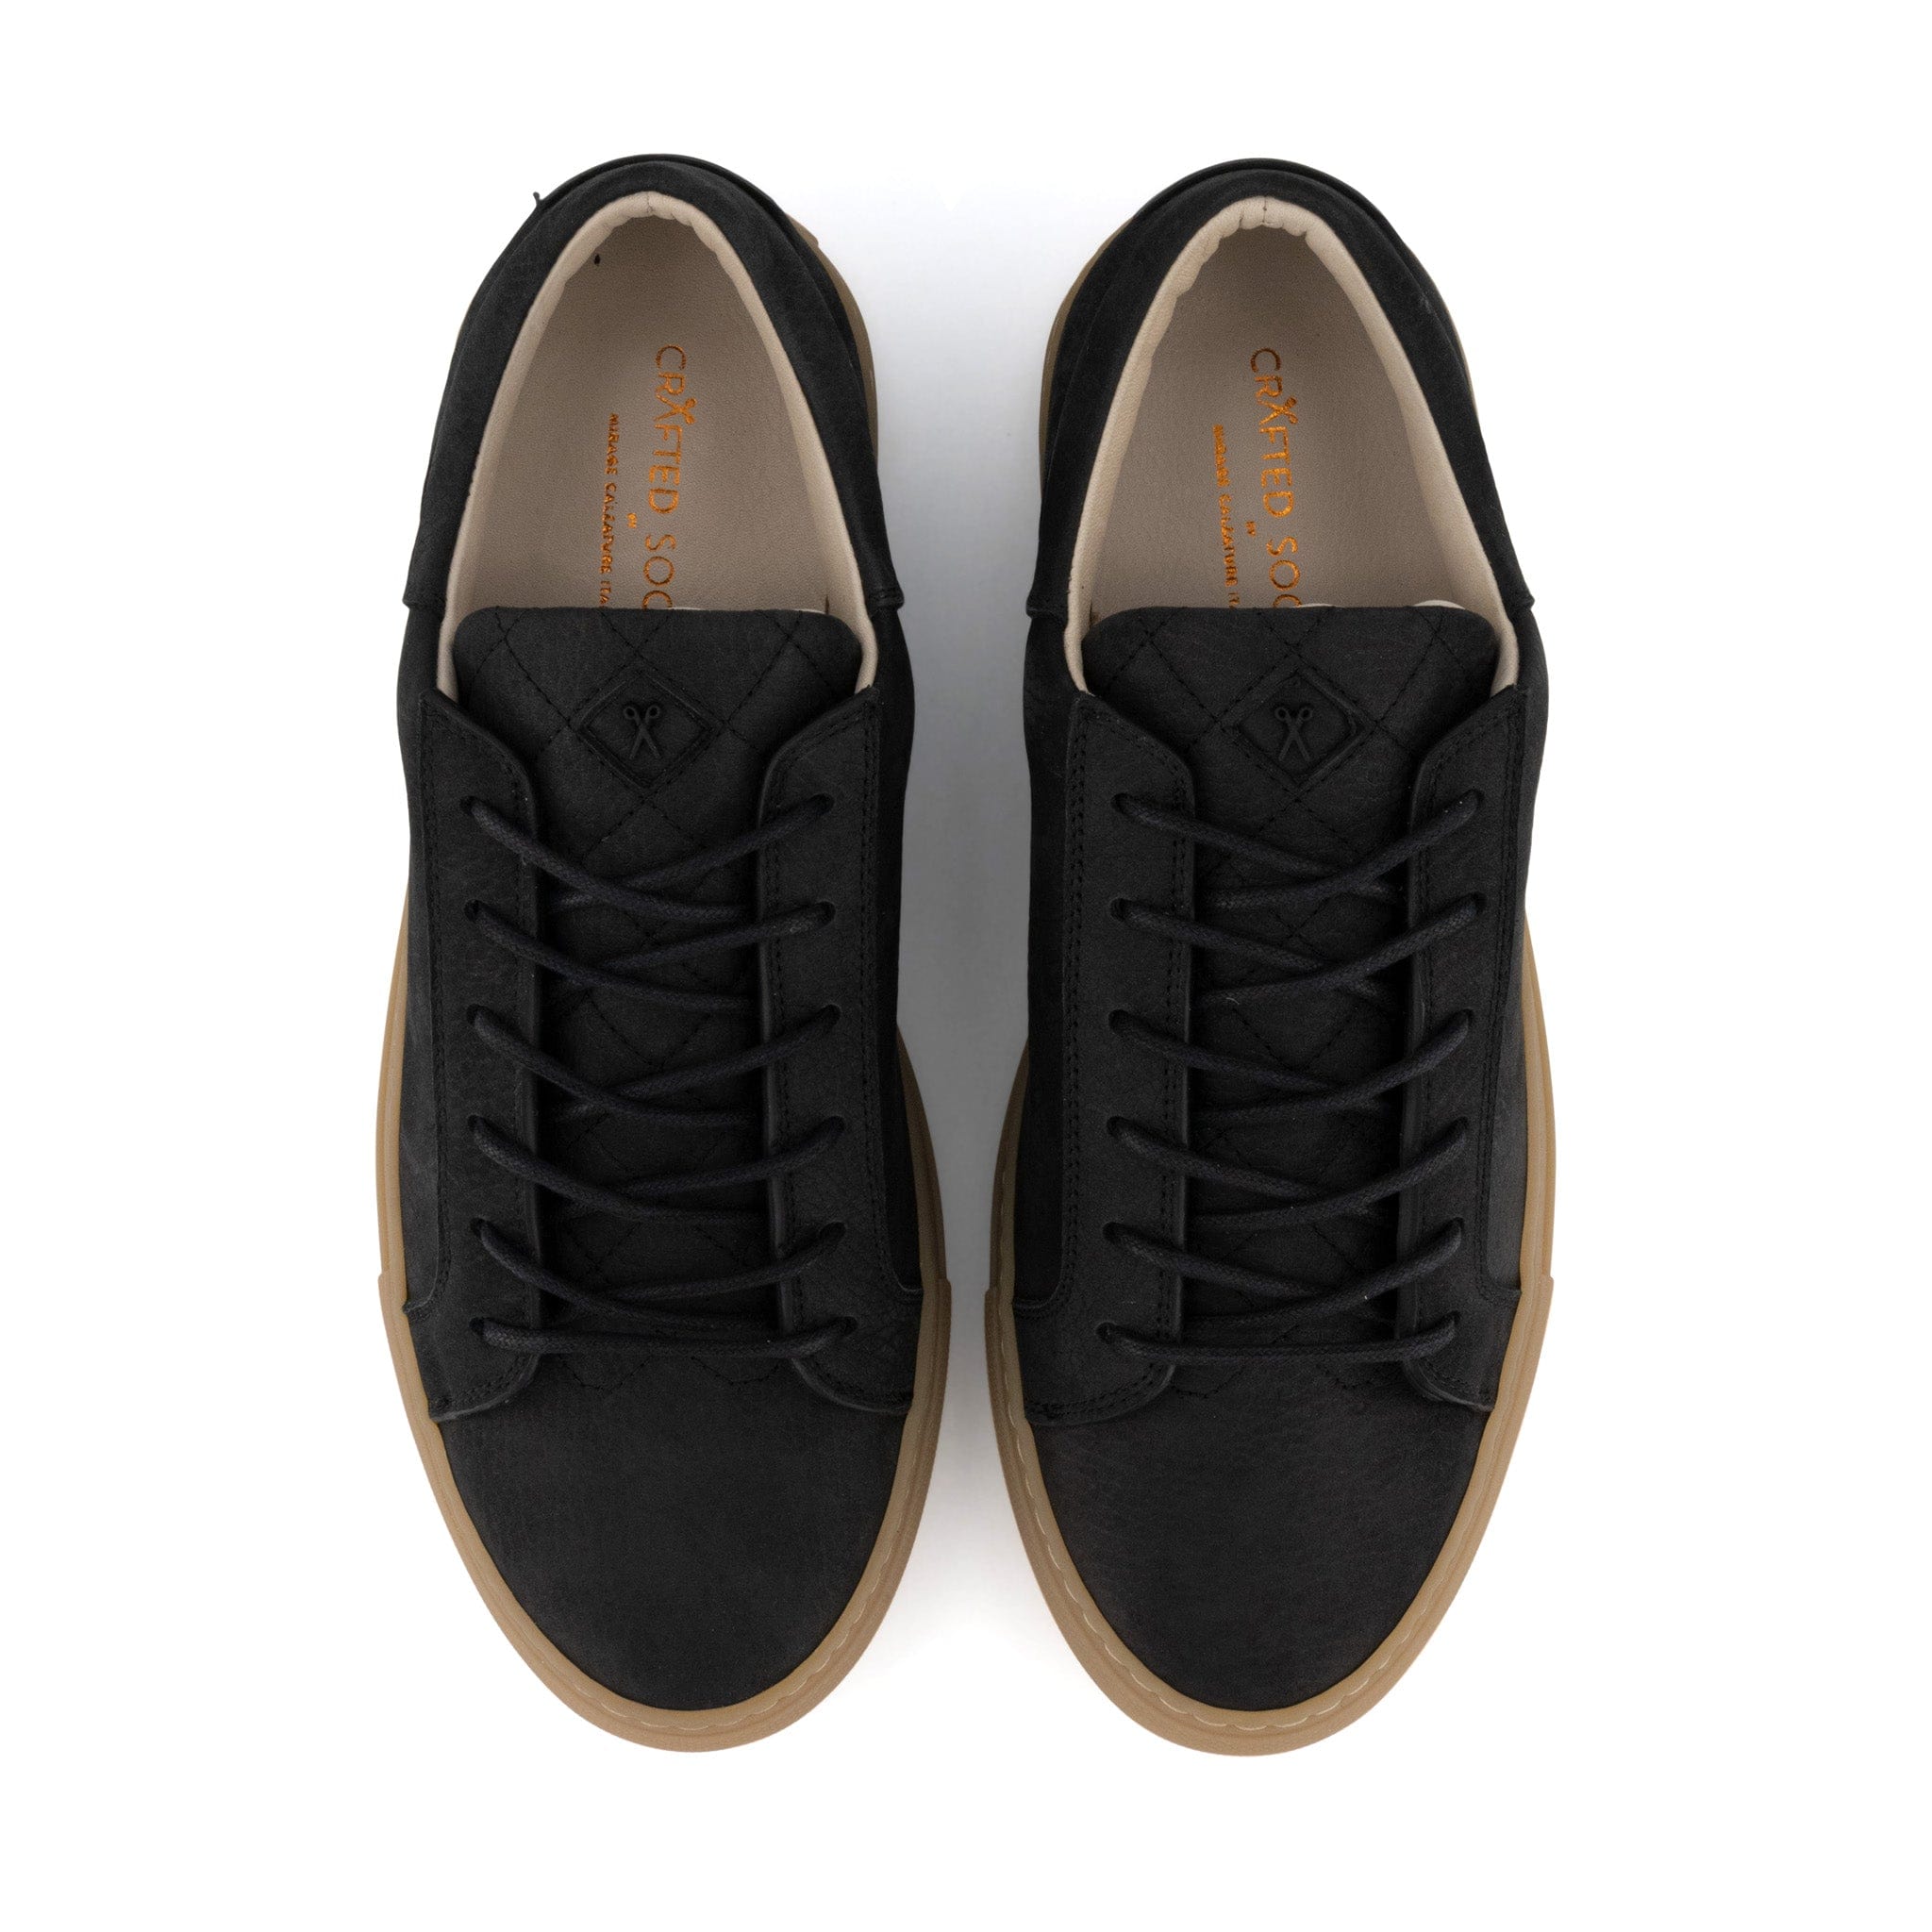 Mario Low Refined Sneaker | Black Nubuck | Gum Rubber Outsole | Made in Italy | Size 41